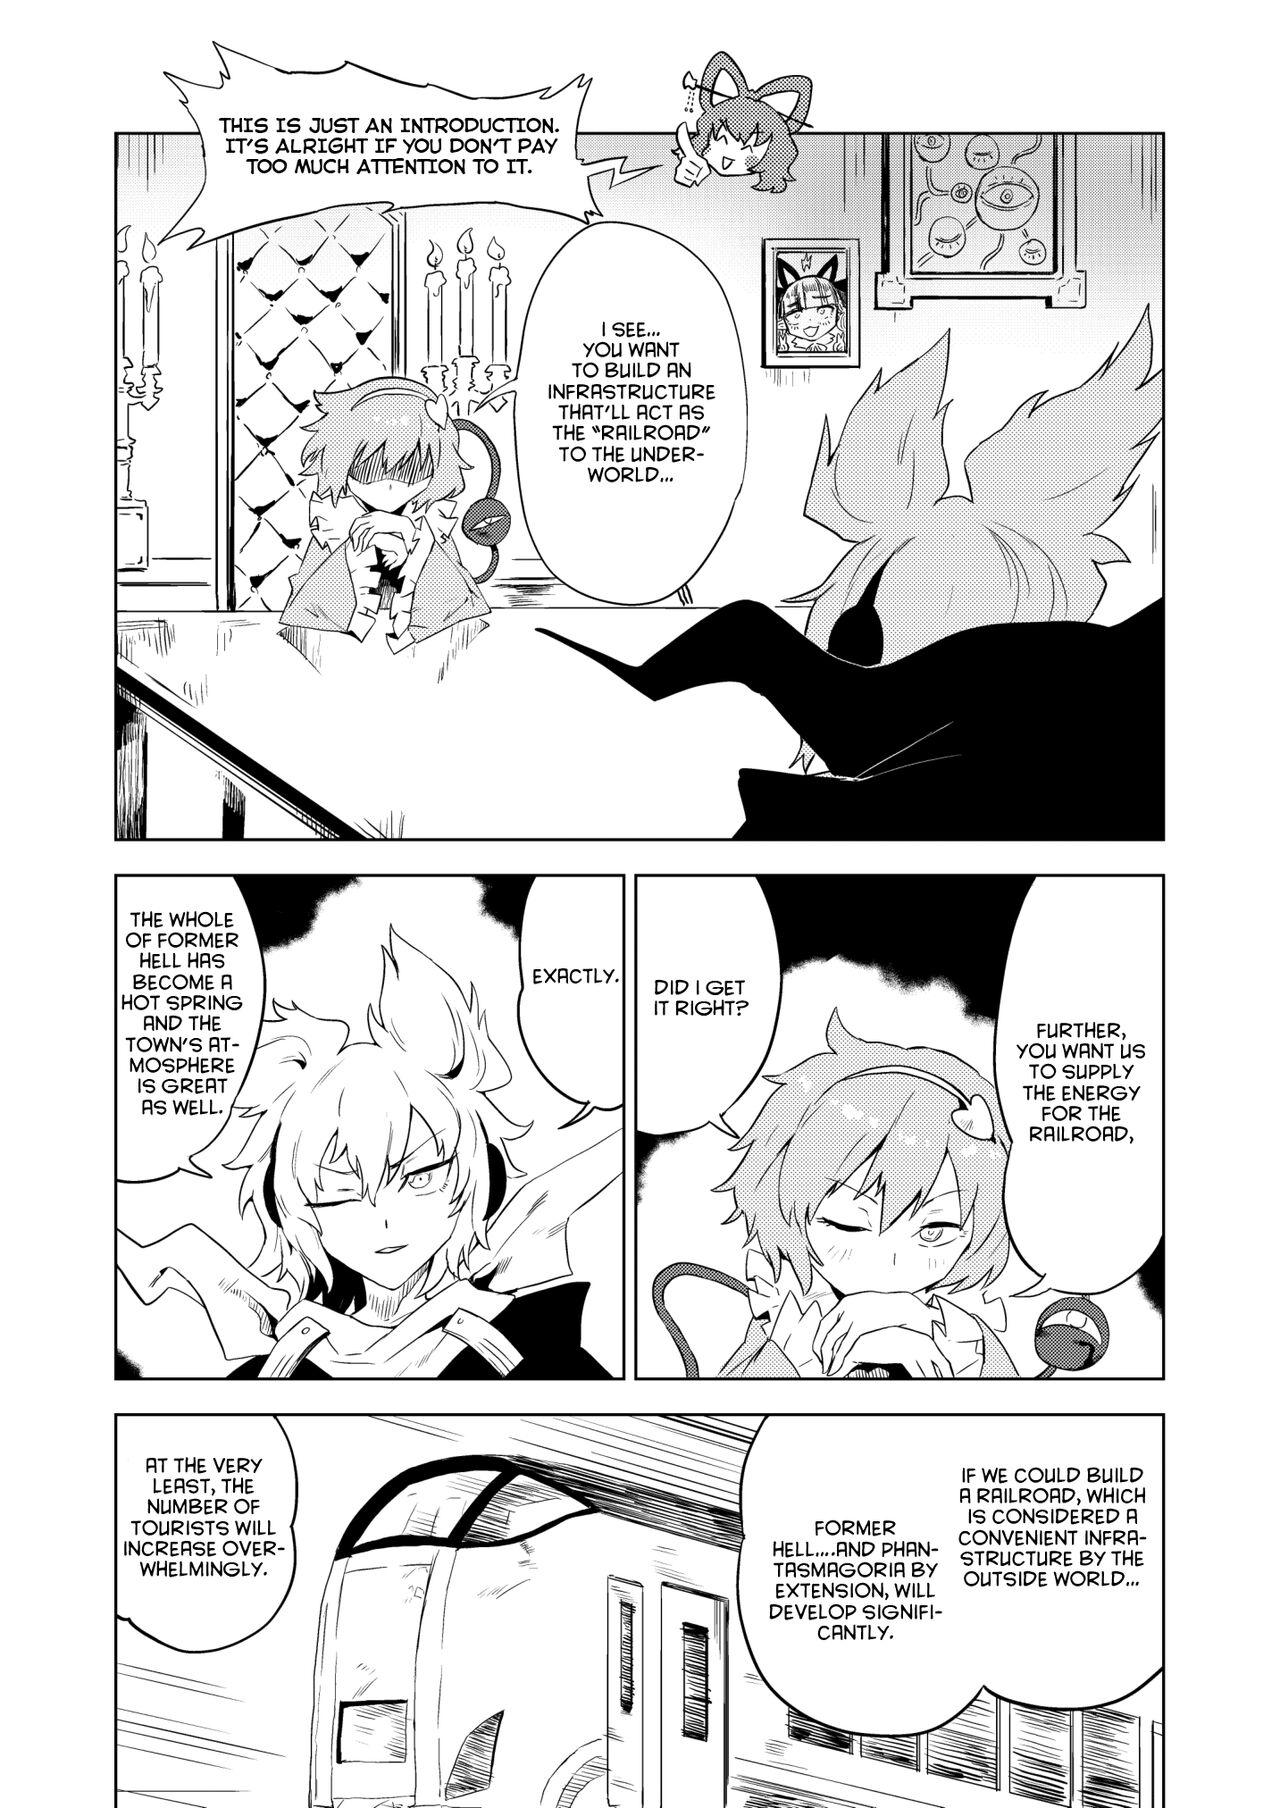 Teenager Chireiden 耻隶殿 - Touhou project American - Page 2